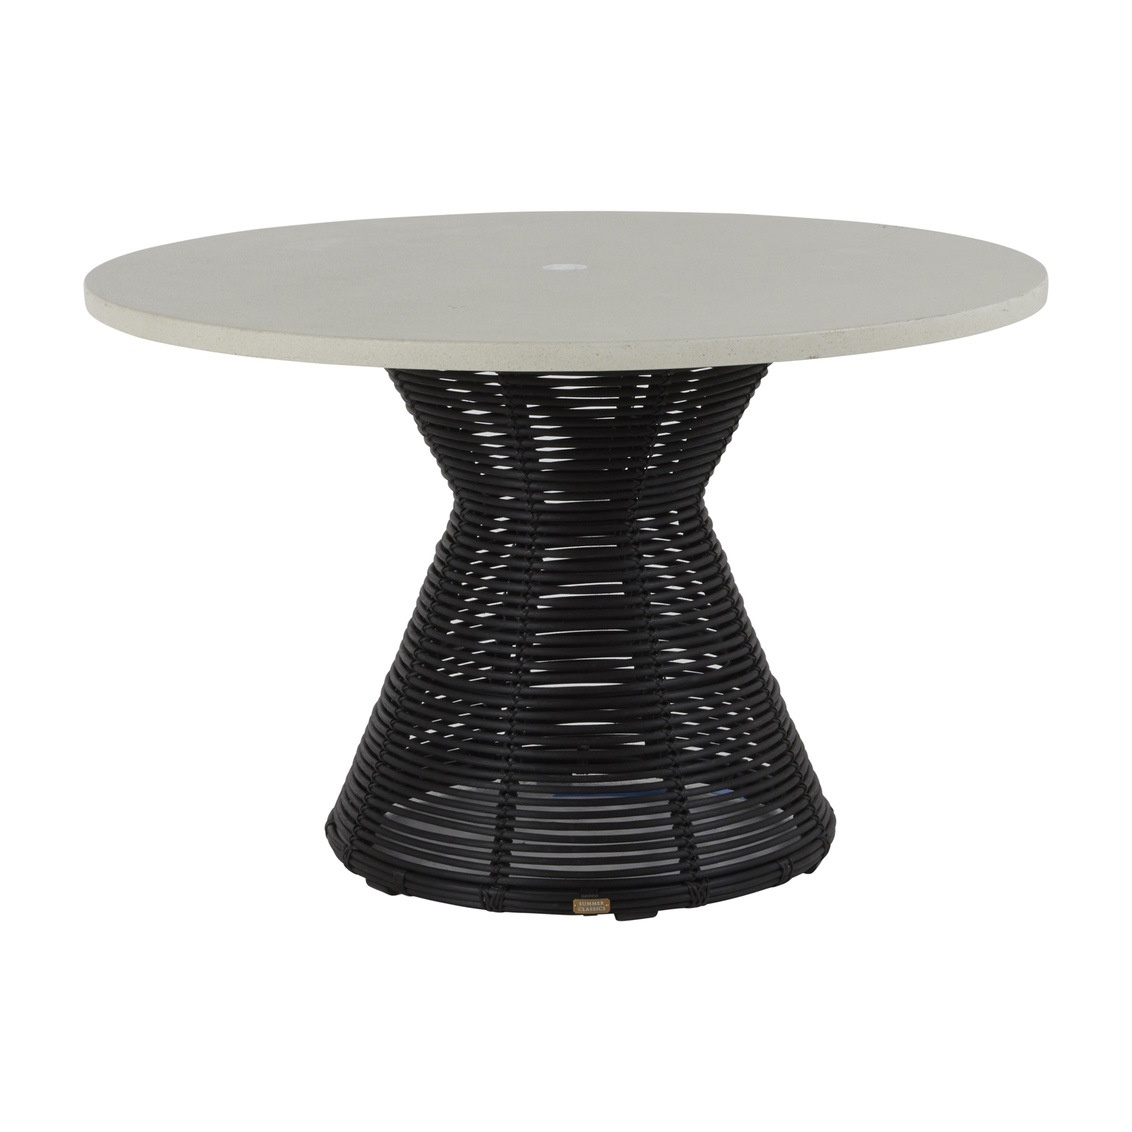 Harris Round Dining Table In Travertine, Outdoor Round Dining Table With Umbrella Hole